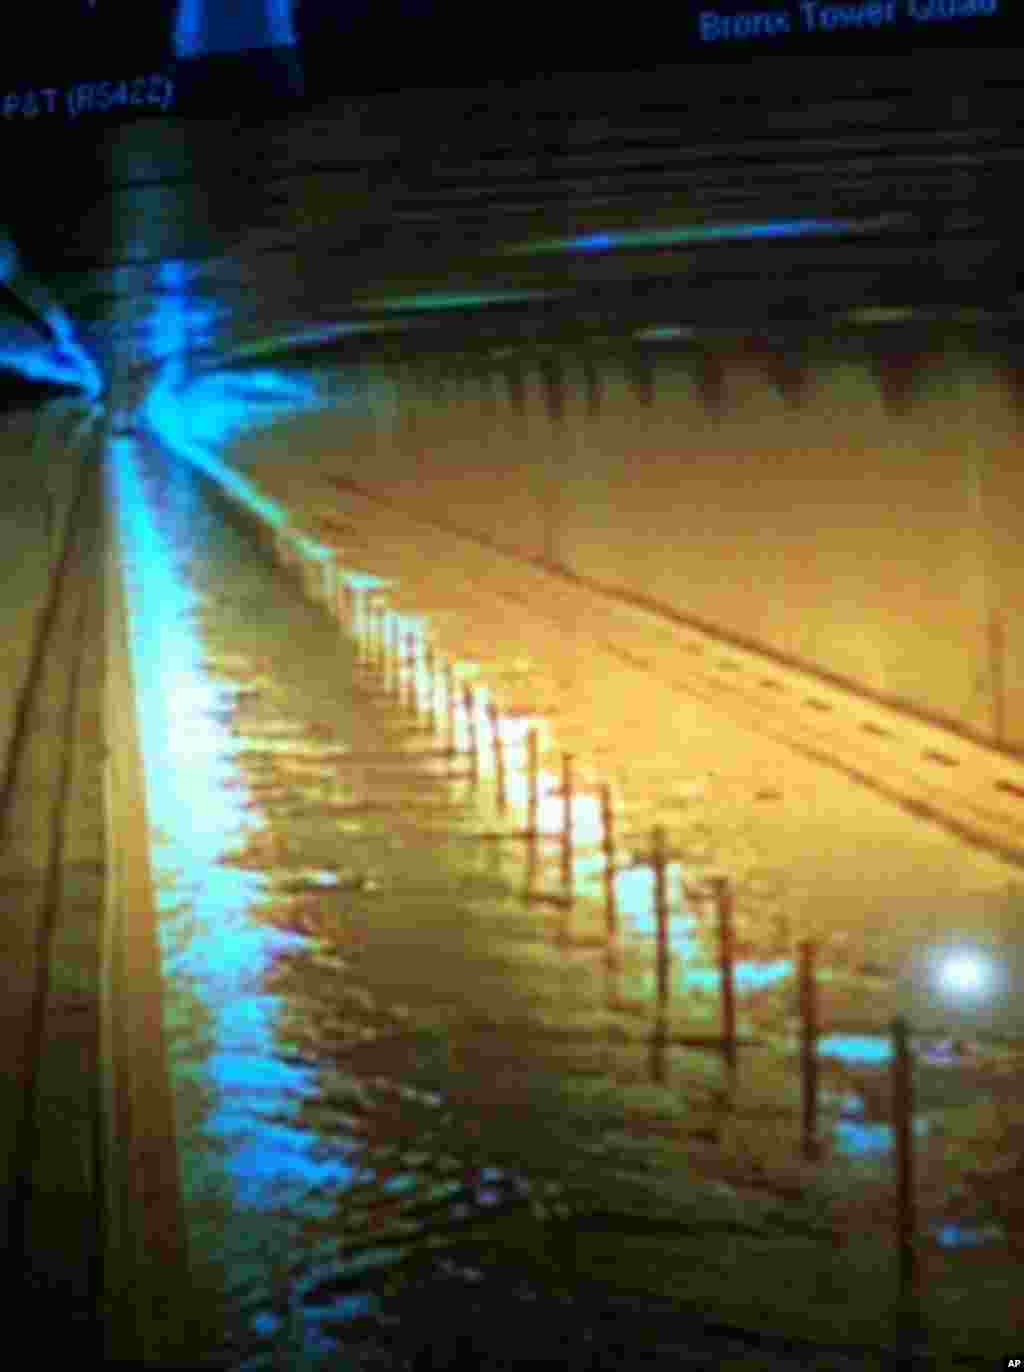 This photo provided by MTA Bridges and Tunnels shows floodwaters from Sandy entering the Hugh L. Carey Tunnel (former Brooklyn-Battery Tunnel), which was closed, October 29, 2012.